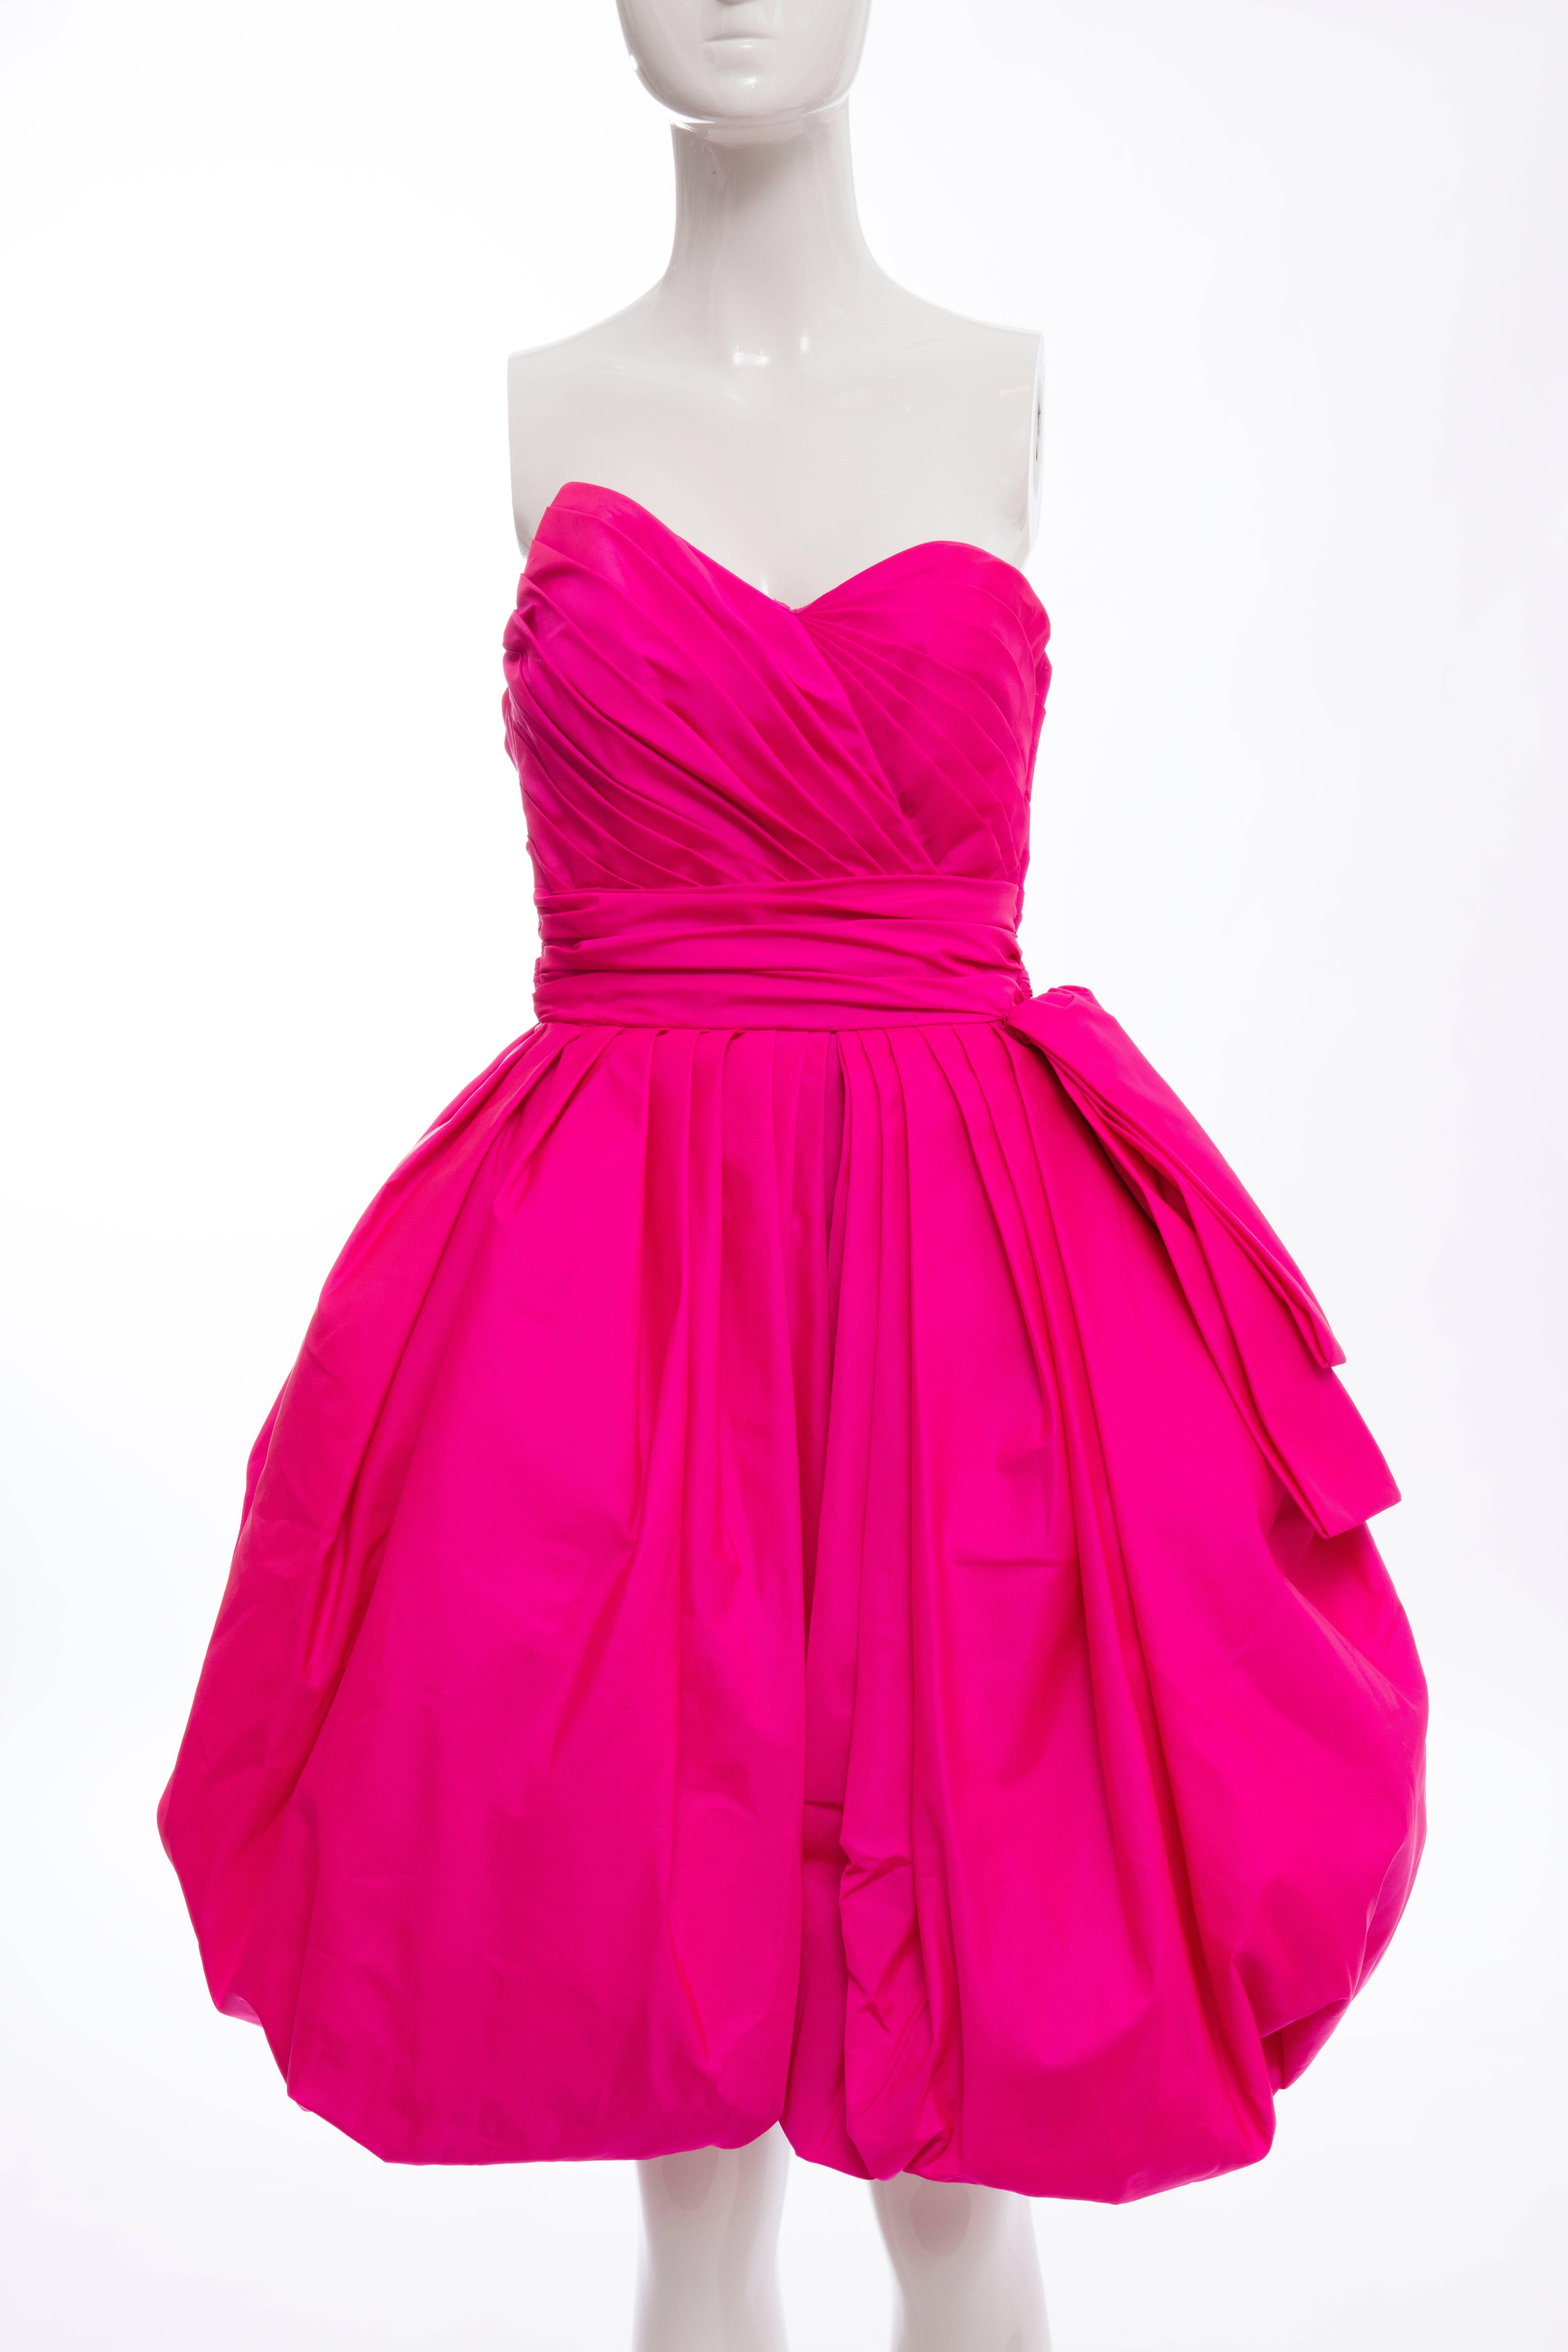 Victor Costa, circa 1980's fluorescent pink taffeta, strapless cocktail dress,side zip and fully lined.